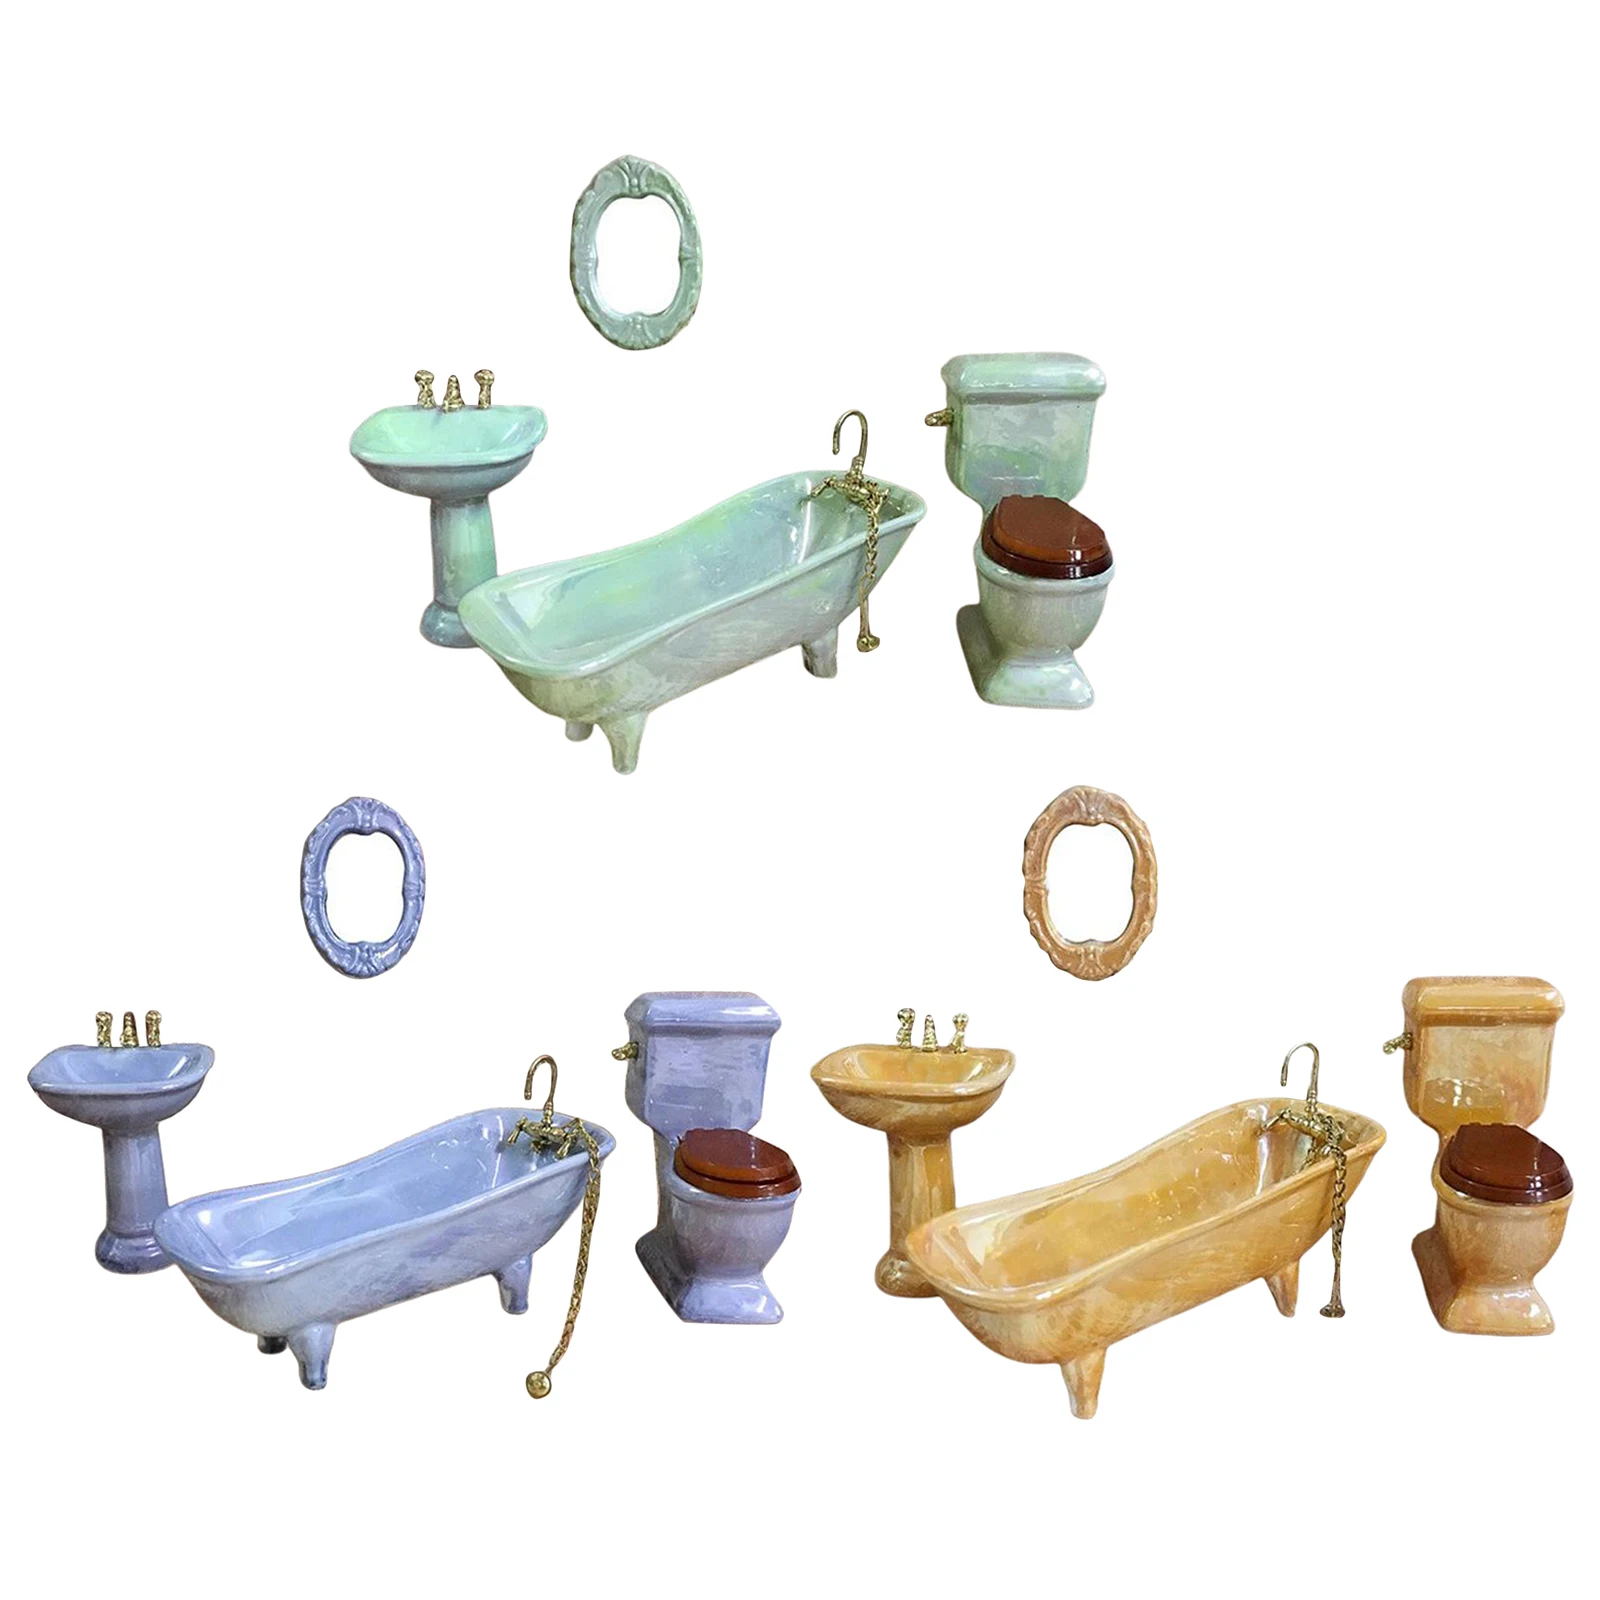 Bathroom Dolls House Accessories Play Set for Dolls Houses, Dollhouse Bathroom Furniture Set 4pcs